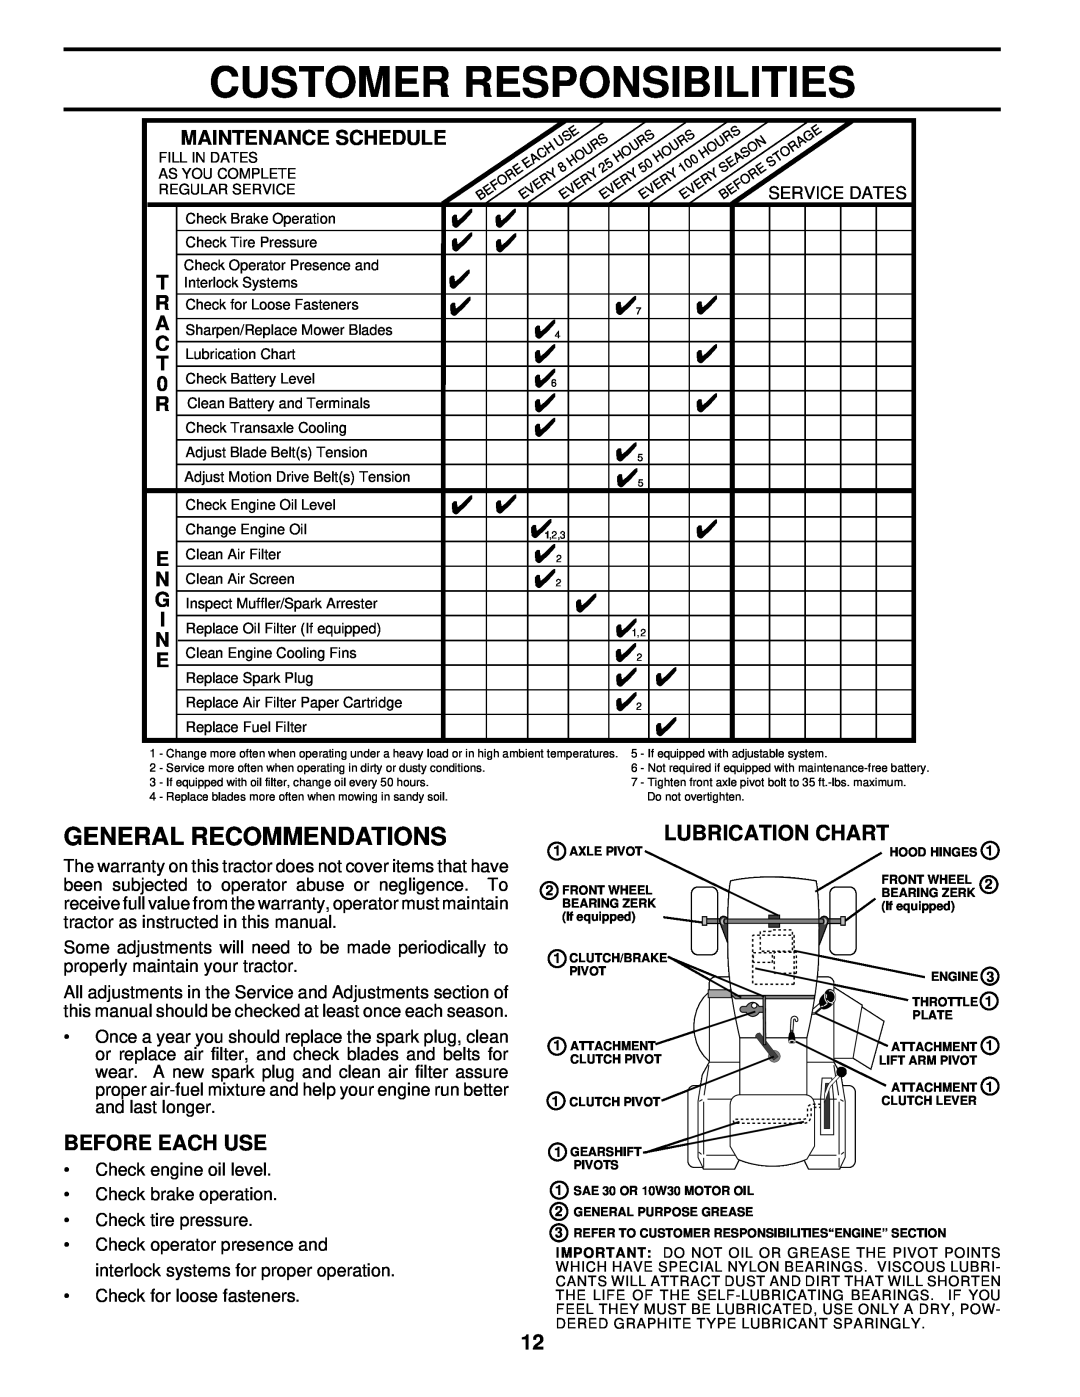 Husqvarna LR122 owner manual Customer Responsibilities, General Recommendations, Lubrication Chart, Before Each Use 